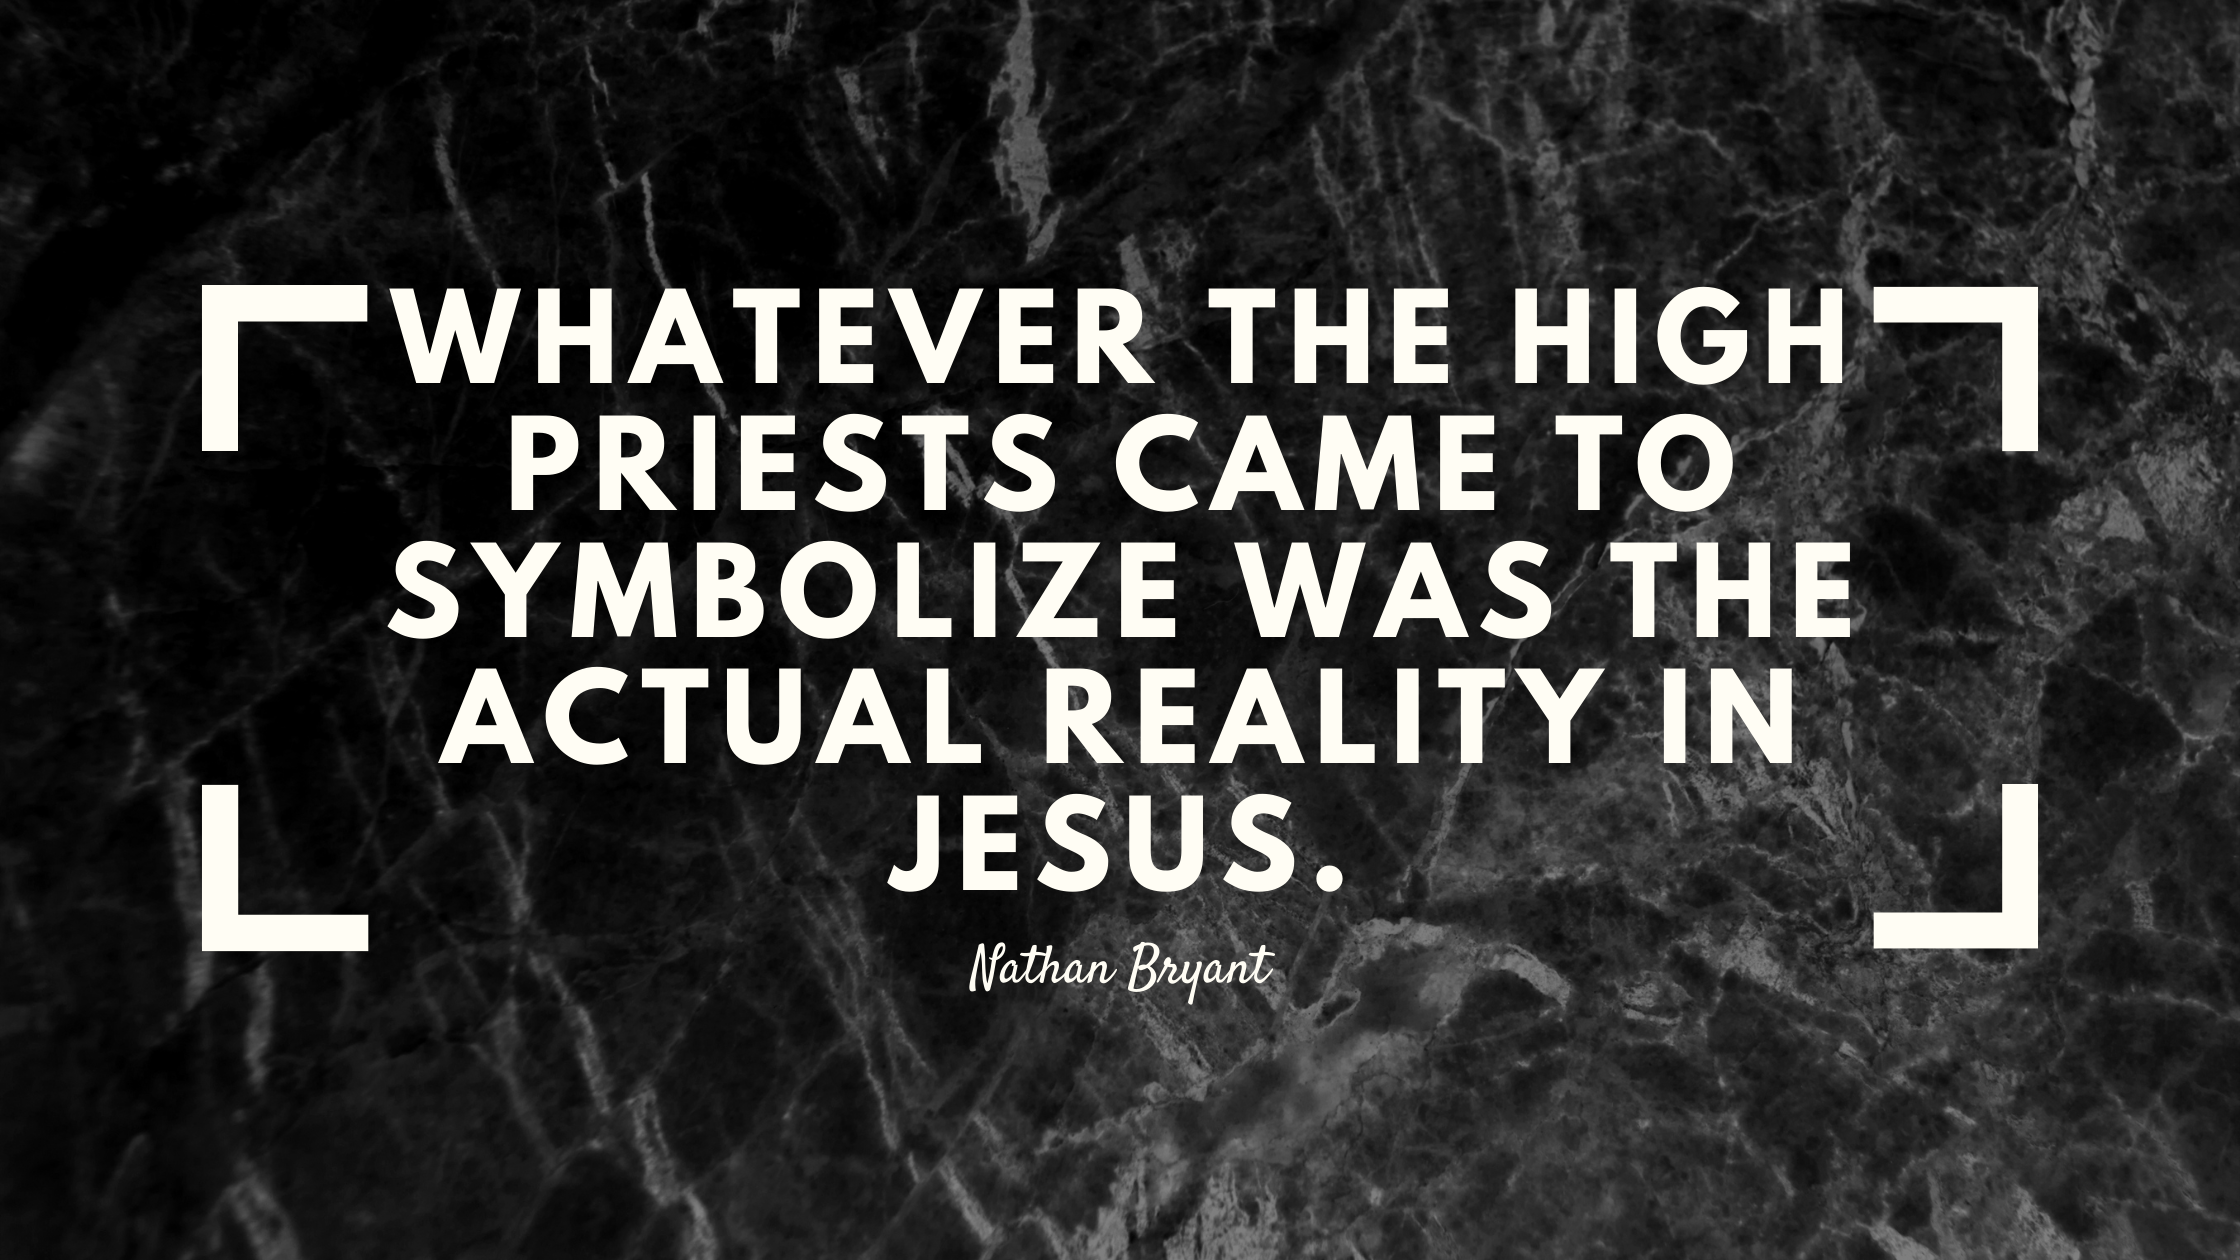 whatever the high priests came to symbolize was the actual reality in Jesus.